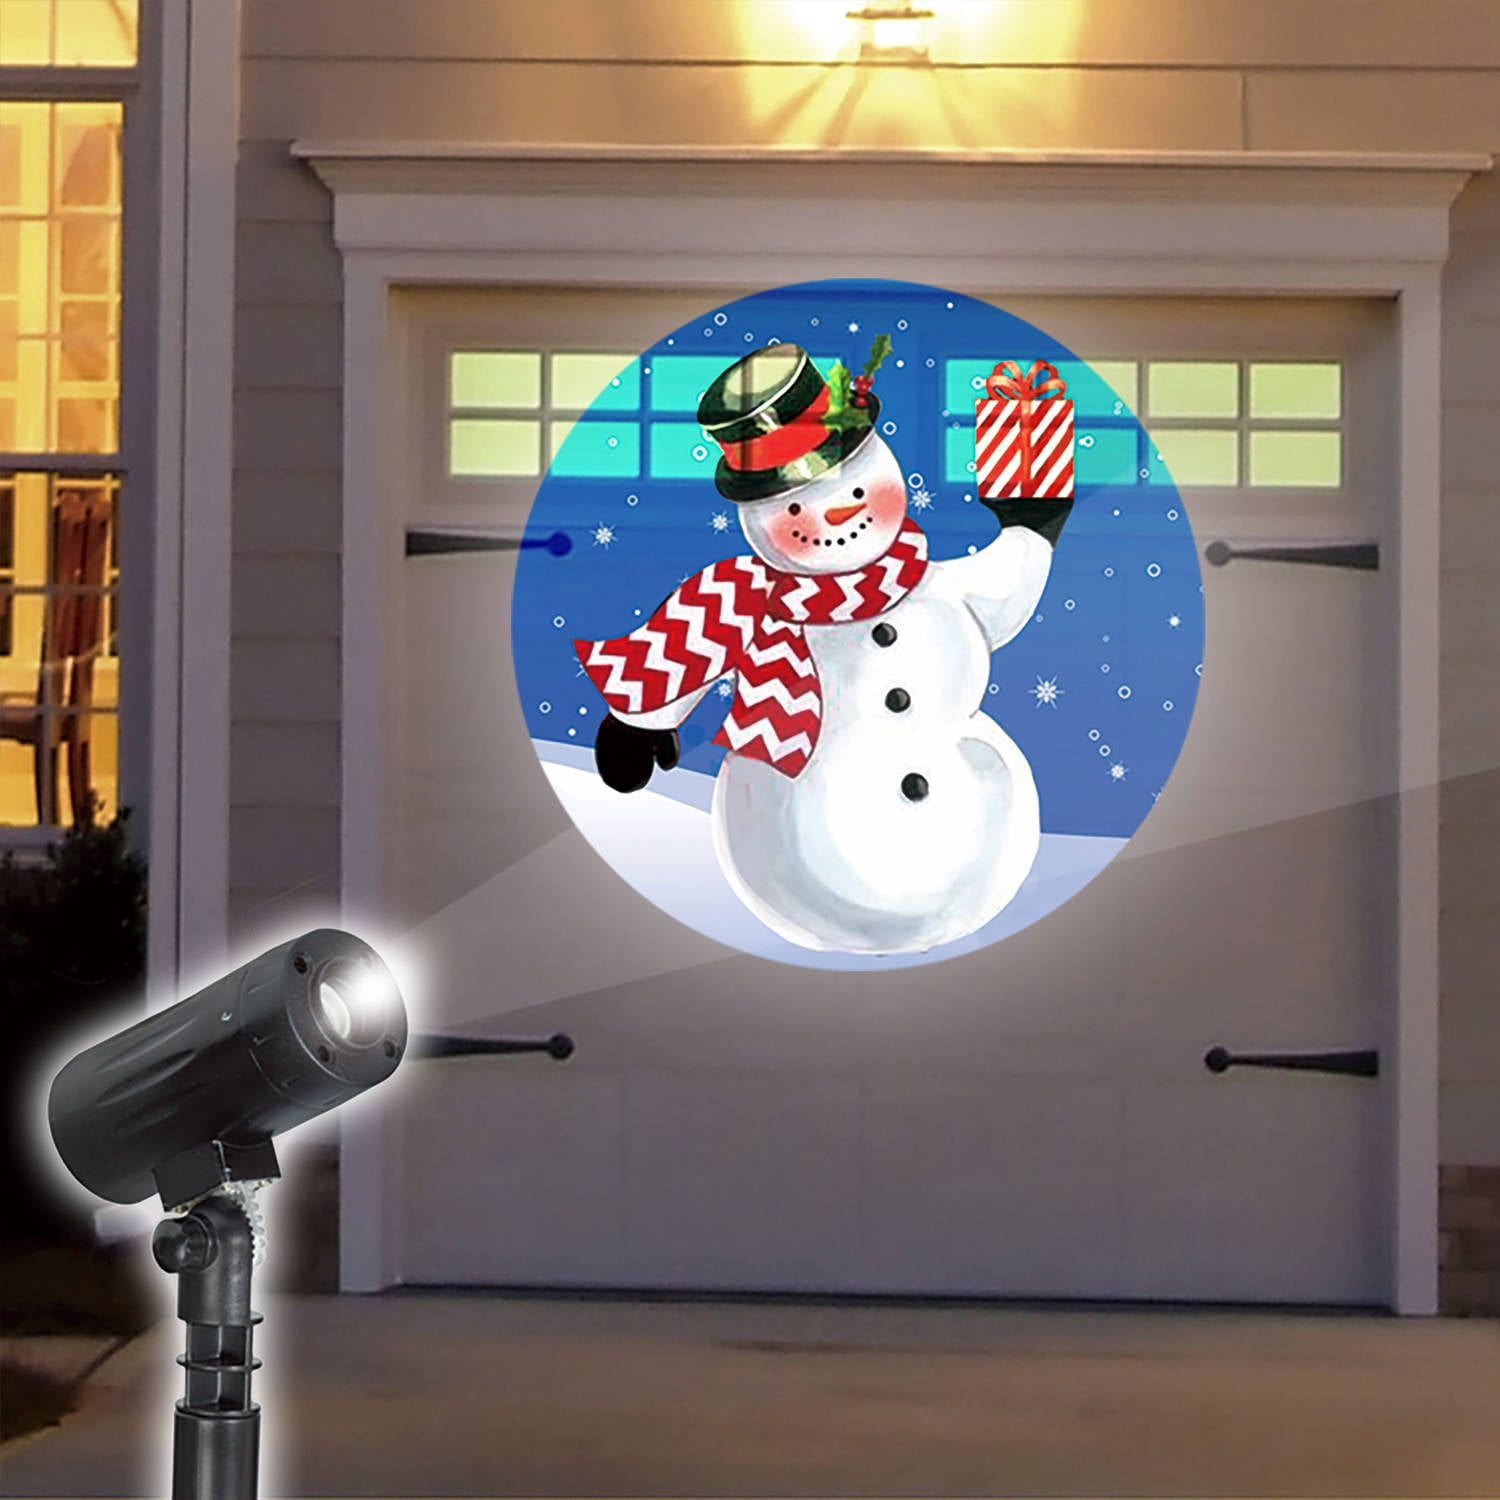 Colorful Snowman Padoo Led Animation LED Projector Snowman Skiing no Color Fading Projector Waterproof Indoor&Outdoor for Xmas Home Birthday Party Landscape Decorations 